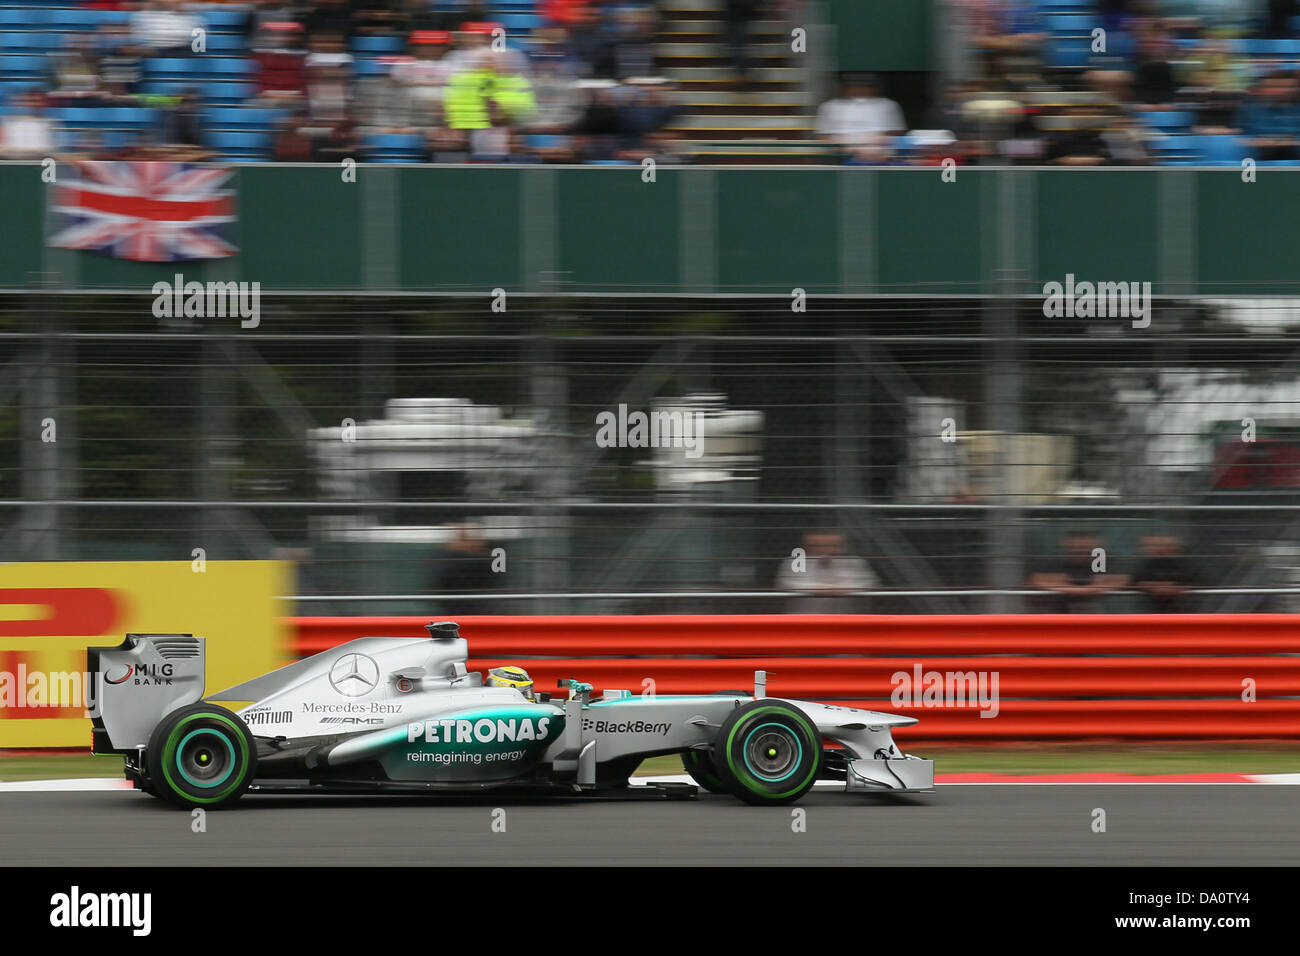 Silverstone, UK. 30th June, 2013. Silverstone Circuit, England. Nico Rosberg drives his Mercedes AMG Petronas F1 W04 to a win at the British GP Credit:  Action Plus Sports Images/Alamy Live News Stock Photo